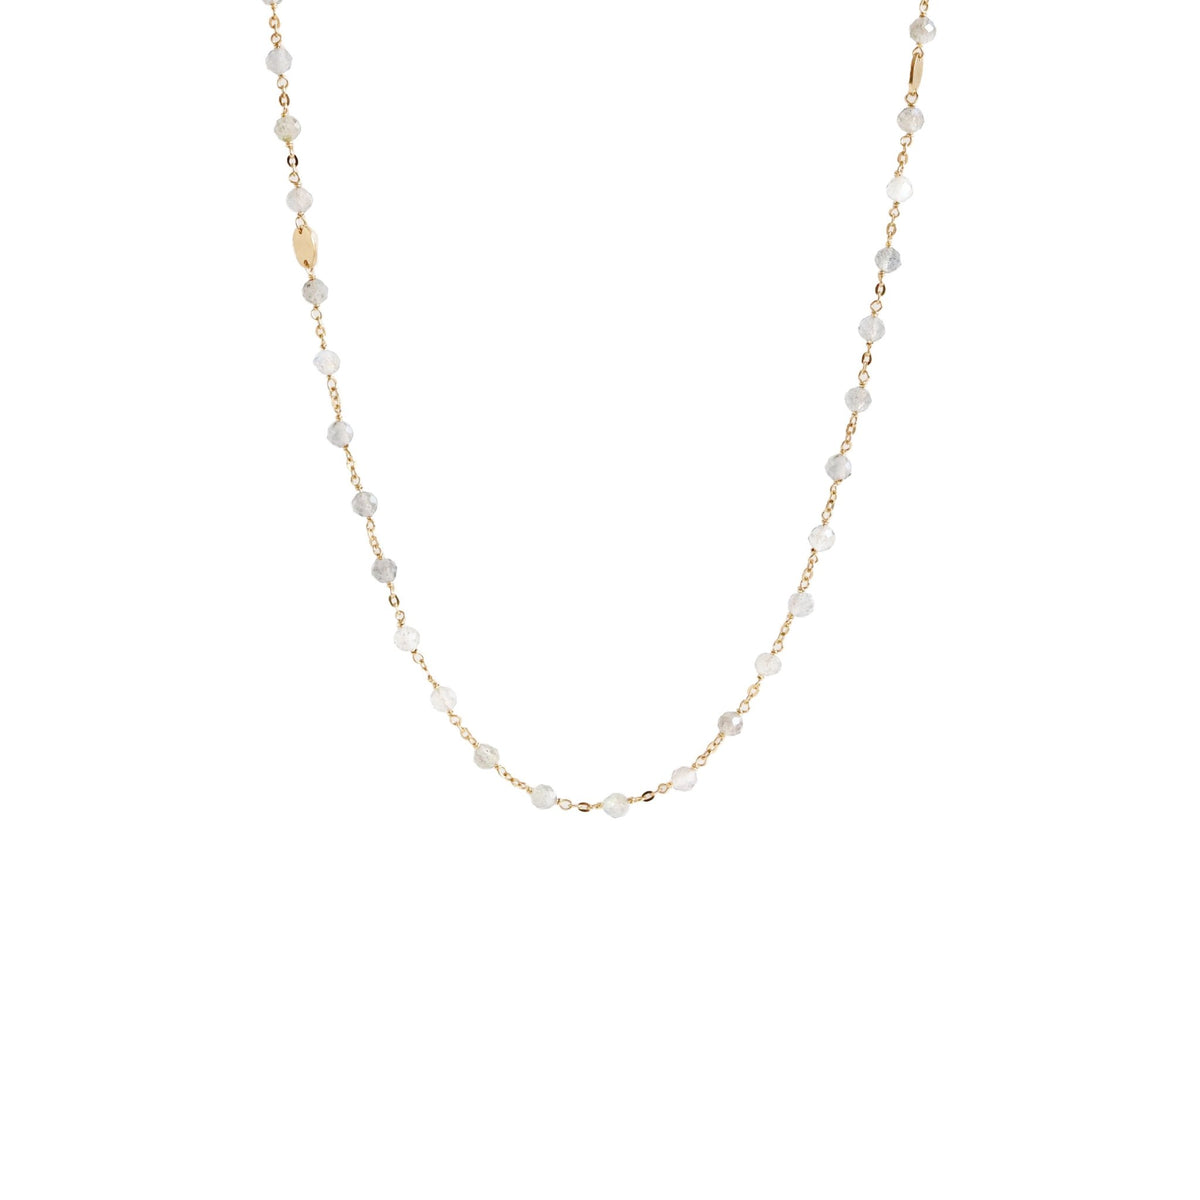 ICONIC MIDI BEADED NECKLACE - RAINBOW MOONSTONE &amp; GOLD 24-25&quot; - SO PRETTY CARA COTTER